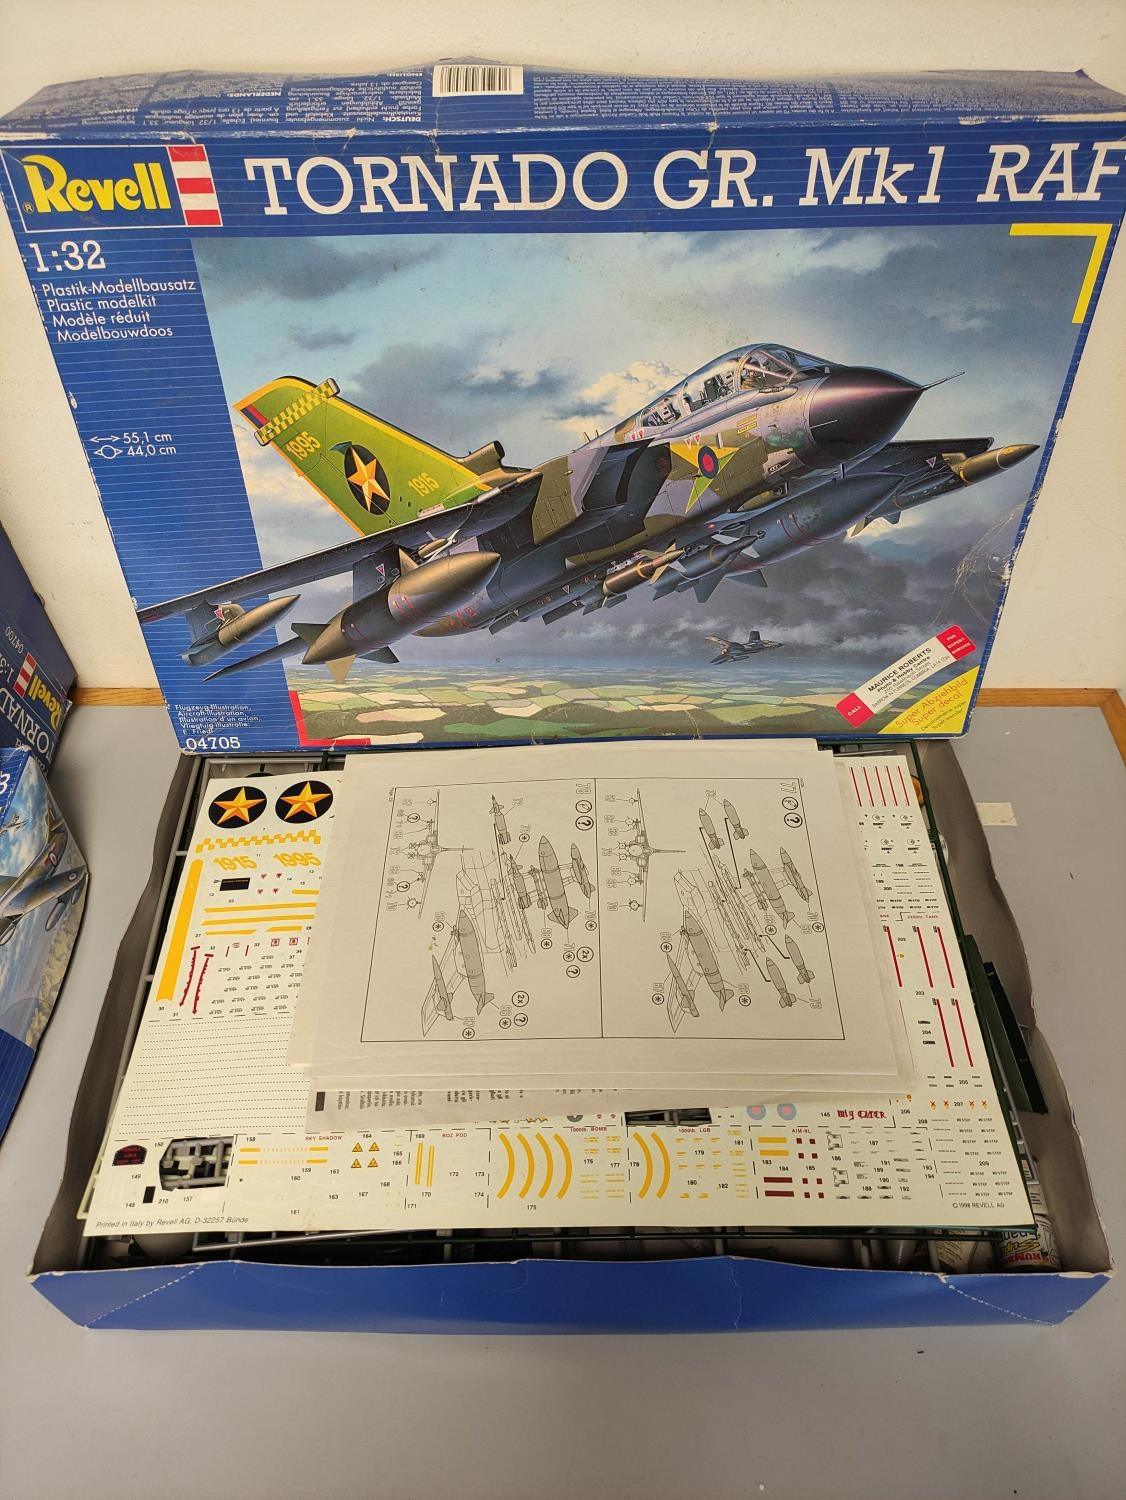 Revell. 1:32 scale model aviation construction kits to include two Tornado GR MkI RAF Fighters - Image 4 of 6